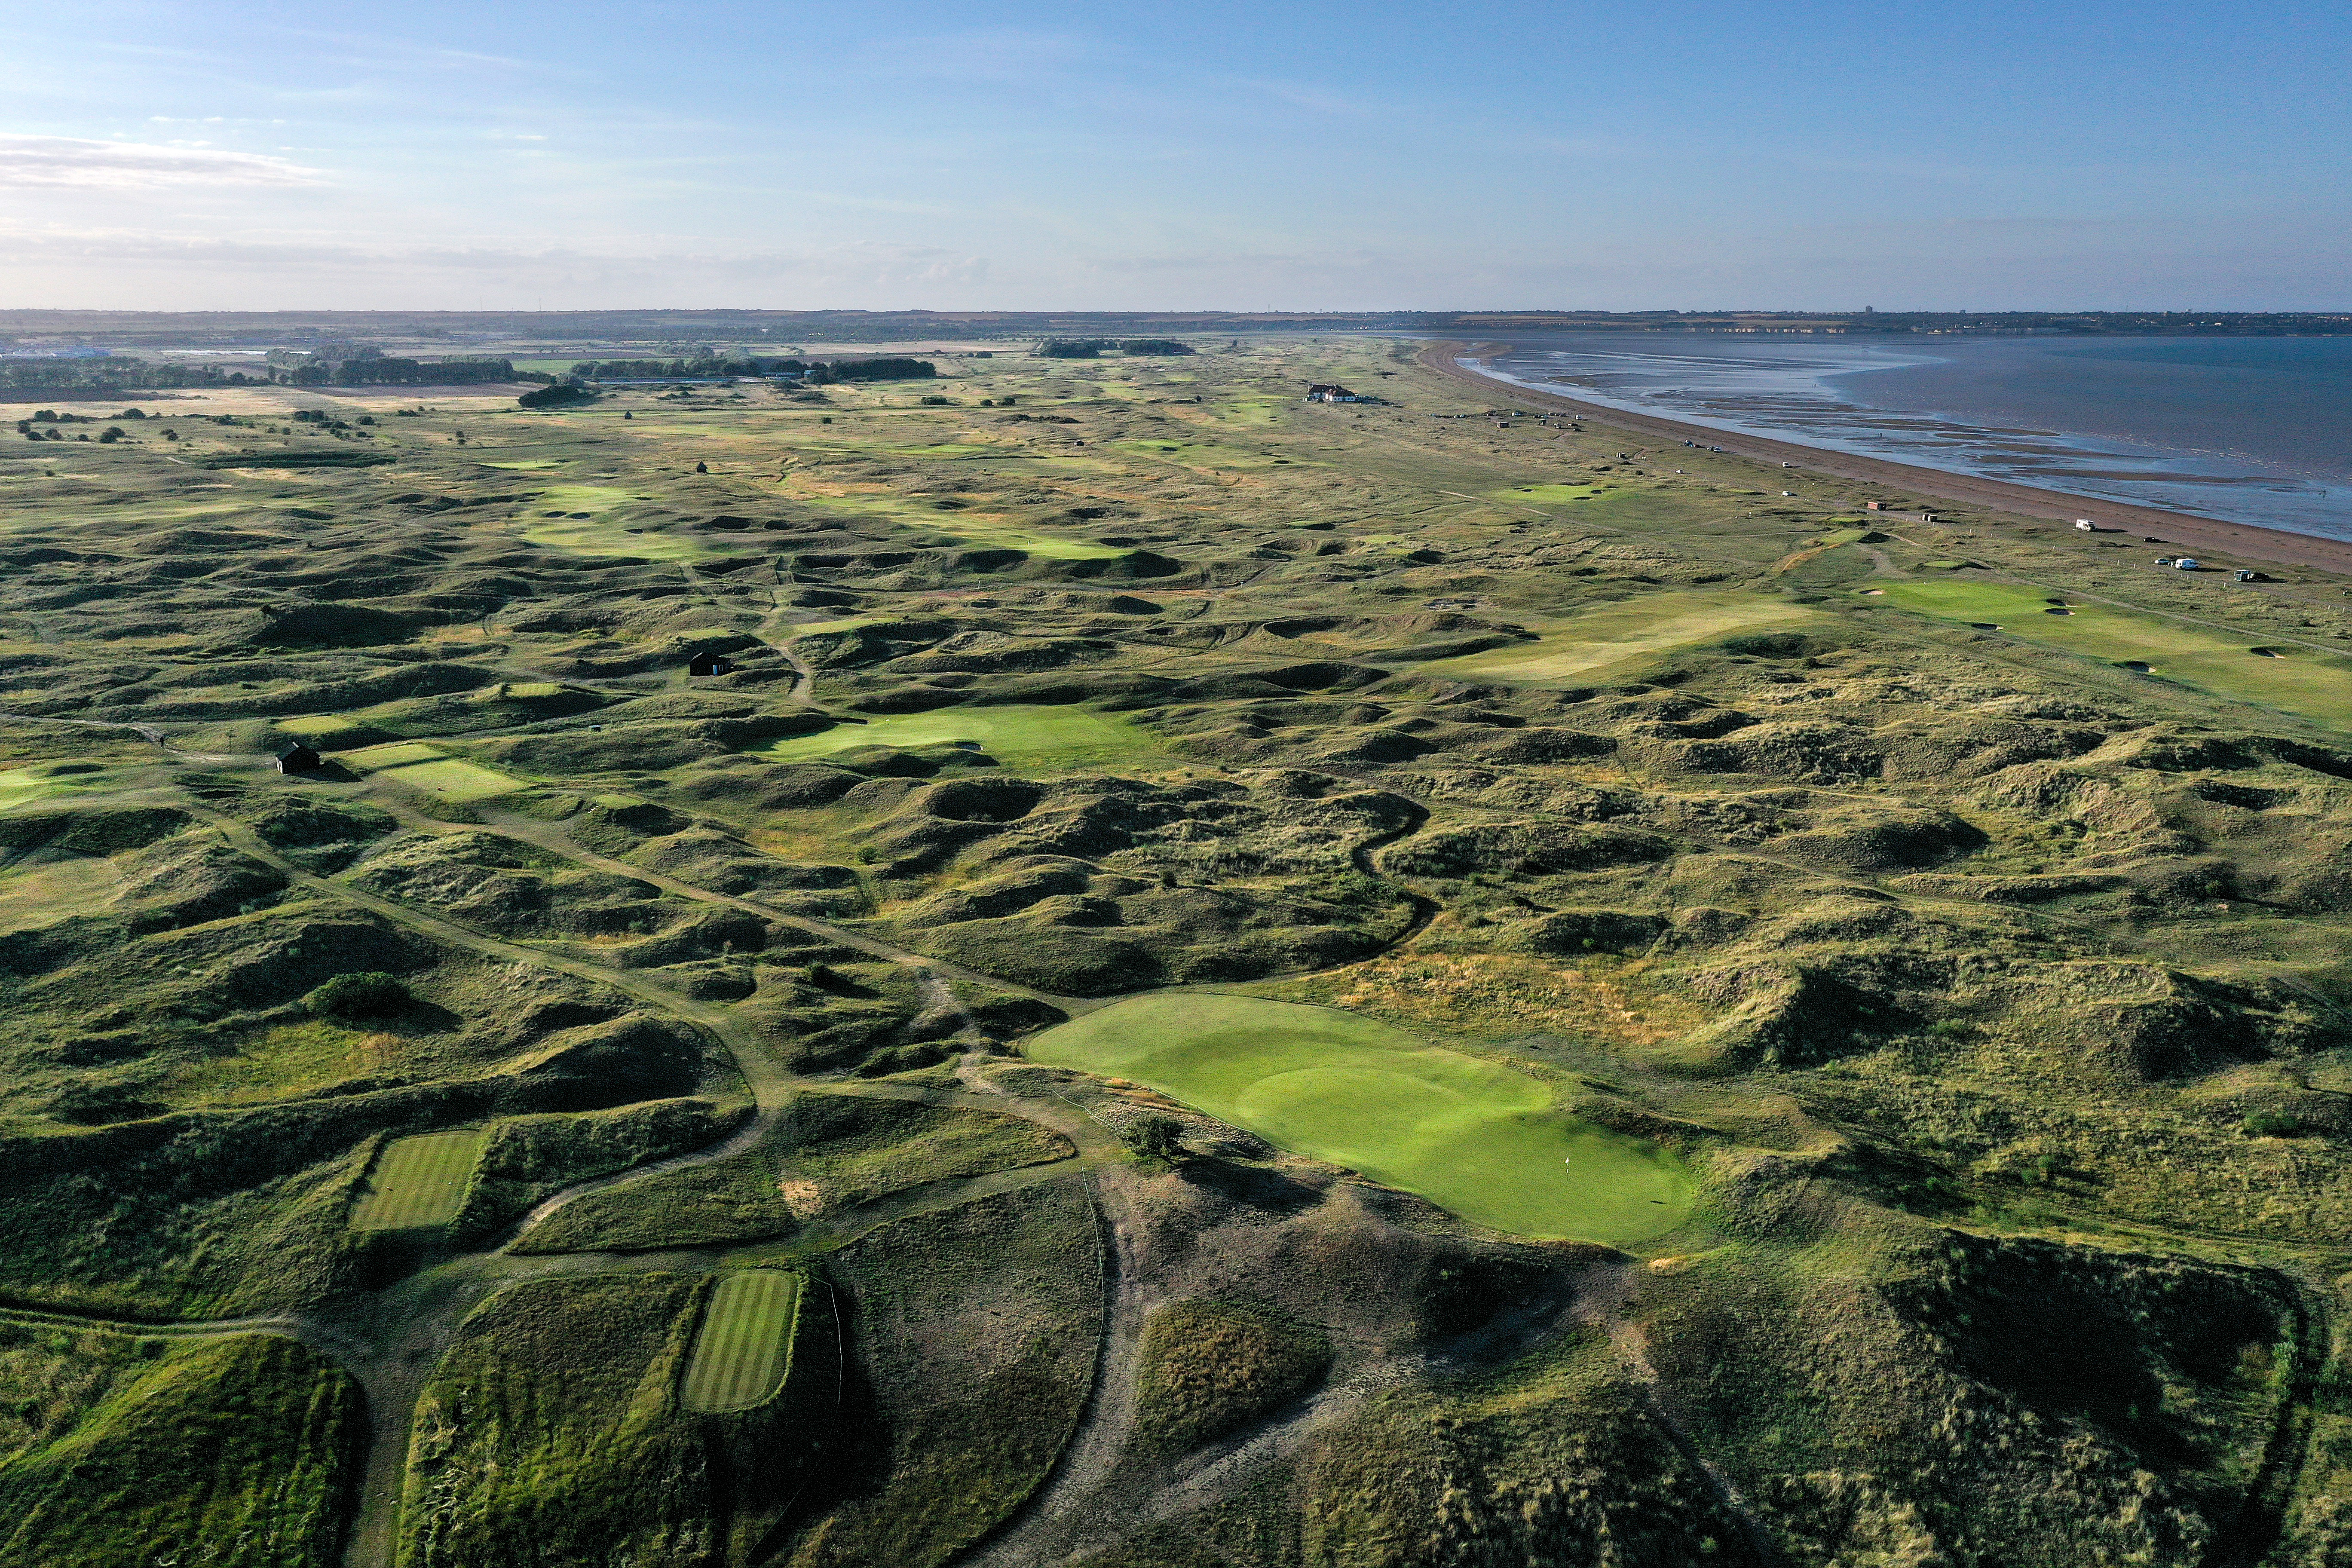 Royal St. Georges in Sandwich, England is a true links golf course